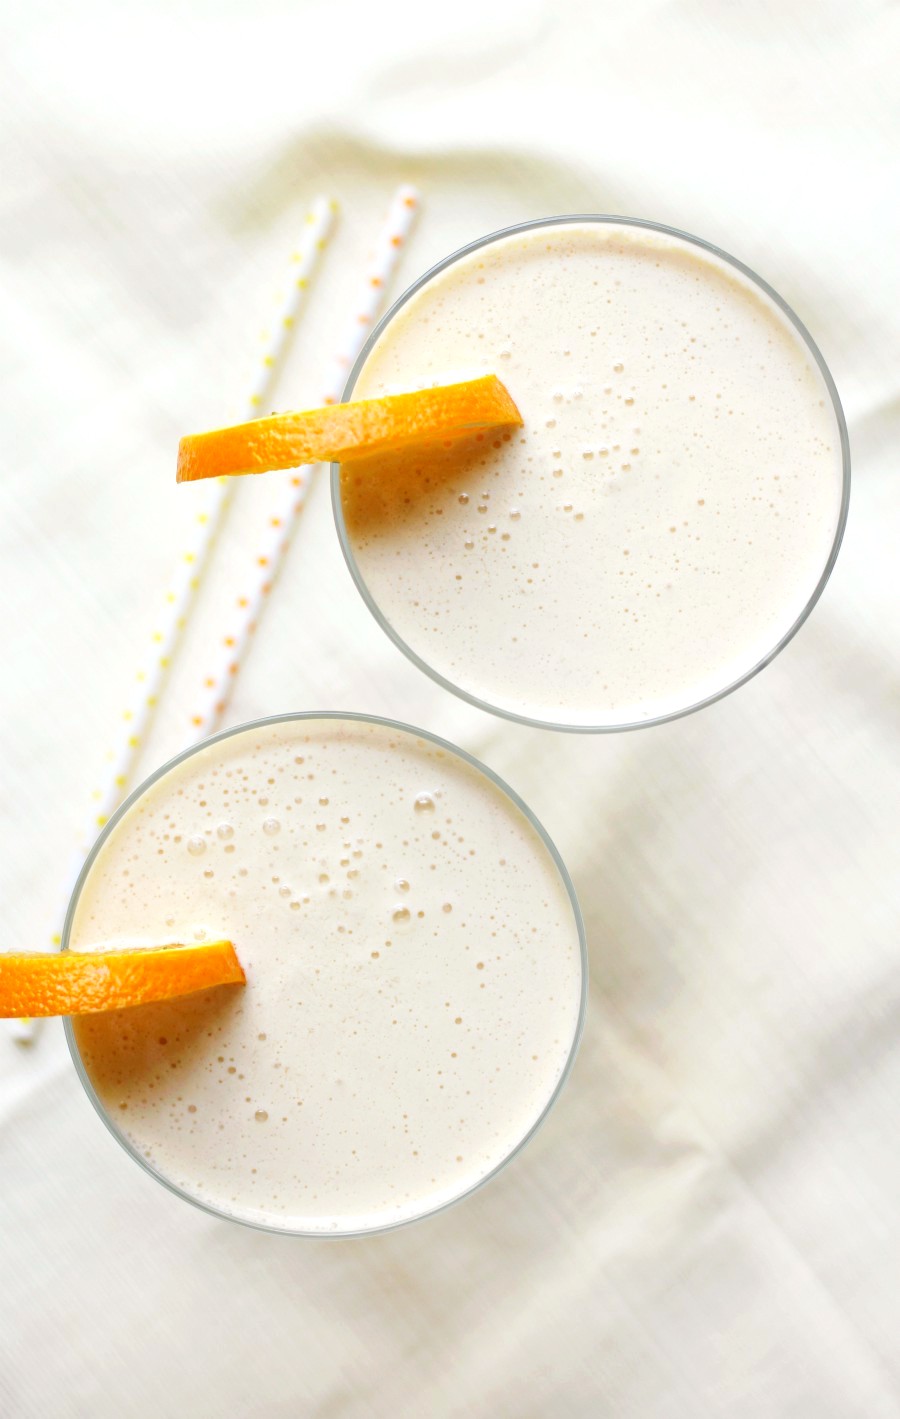 4-Ingredient Orange Julius Cocktail (Gluten-Free, Vegan) | Strength and Sunshine @RebeccaGF666 Give your Orange Julius a grown-up boozy twist! A quick and easy 4-Ingredient Orange Julius Cocktail recipe that's gluten-free, vegan, and makes for a perfect frozen, creamy, and fruit treat! A sippable Creamsicle for adults only! #orangejulius #creamsicle #cocktail #glutenfree #vegan 